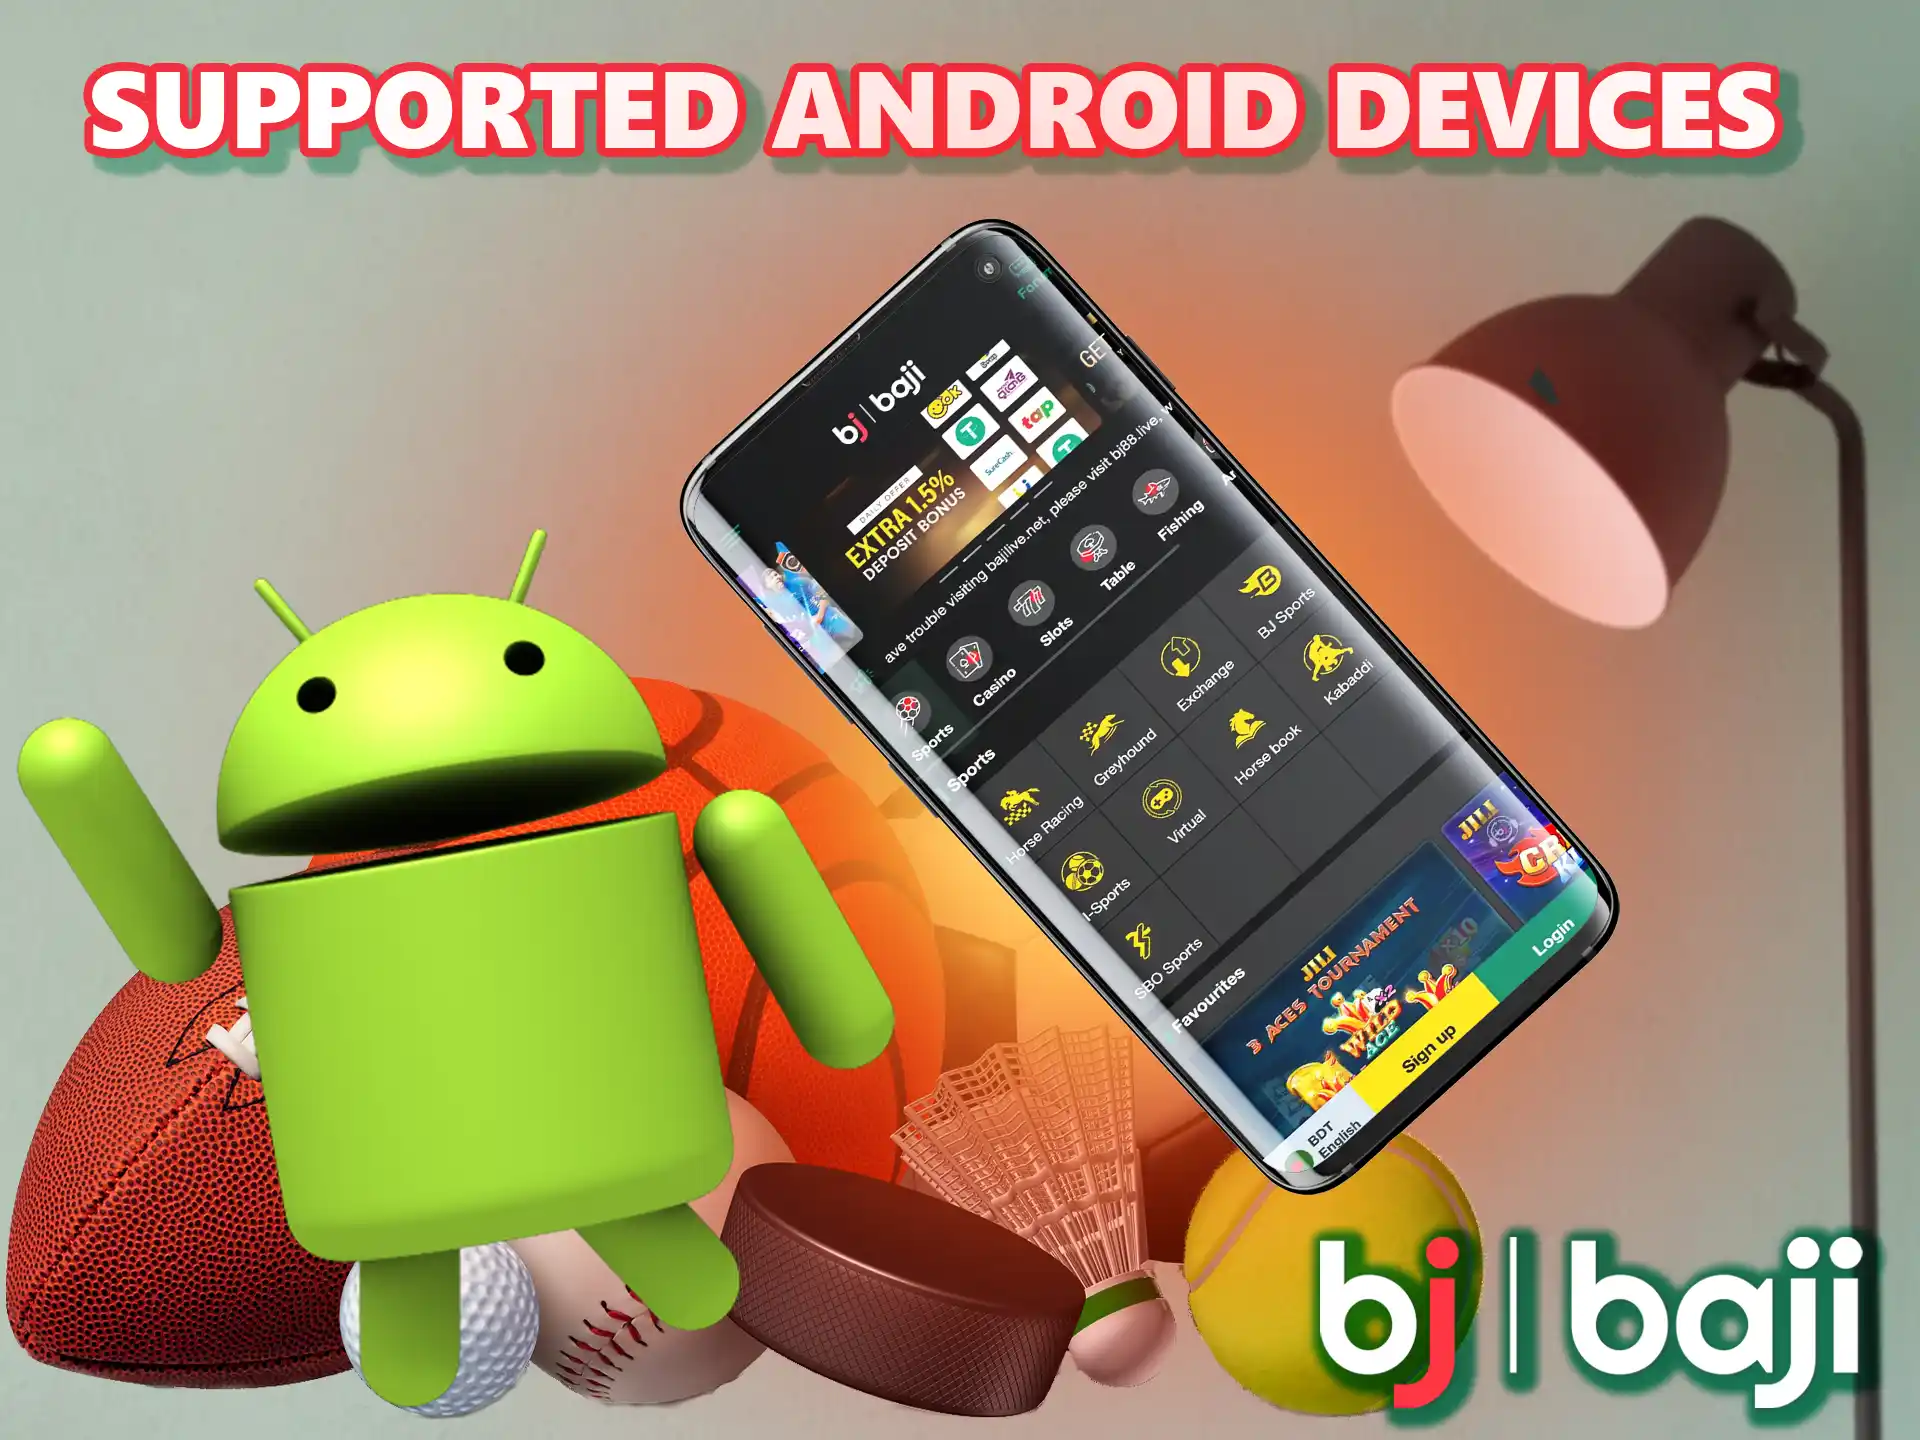 Thanks to detailed tests we can say that the Baji software for green robot works on all popular devices.